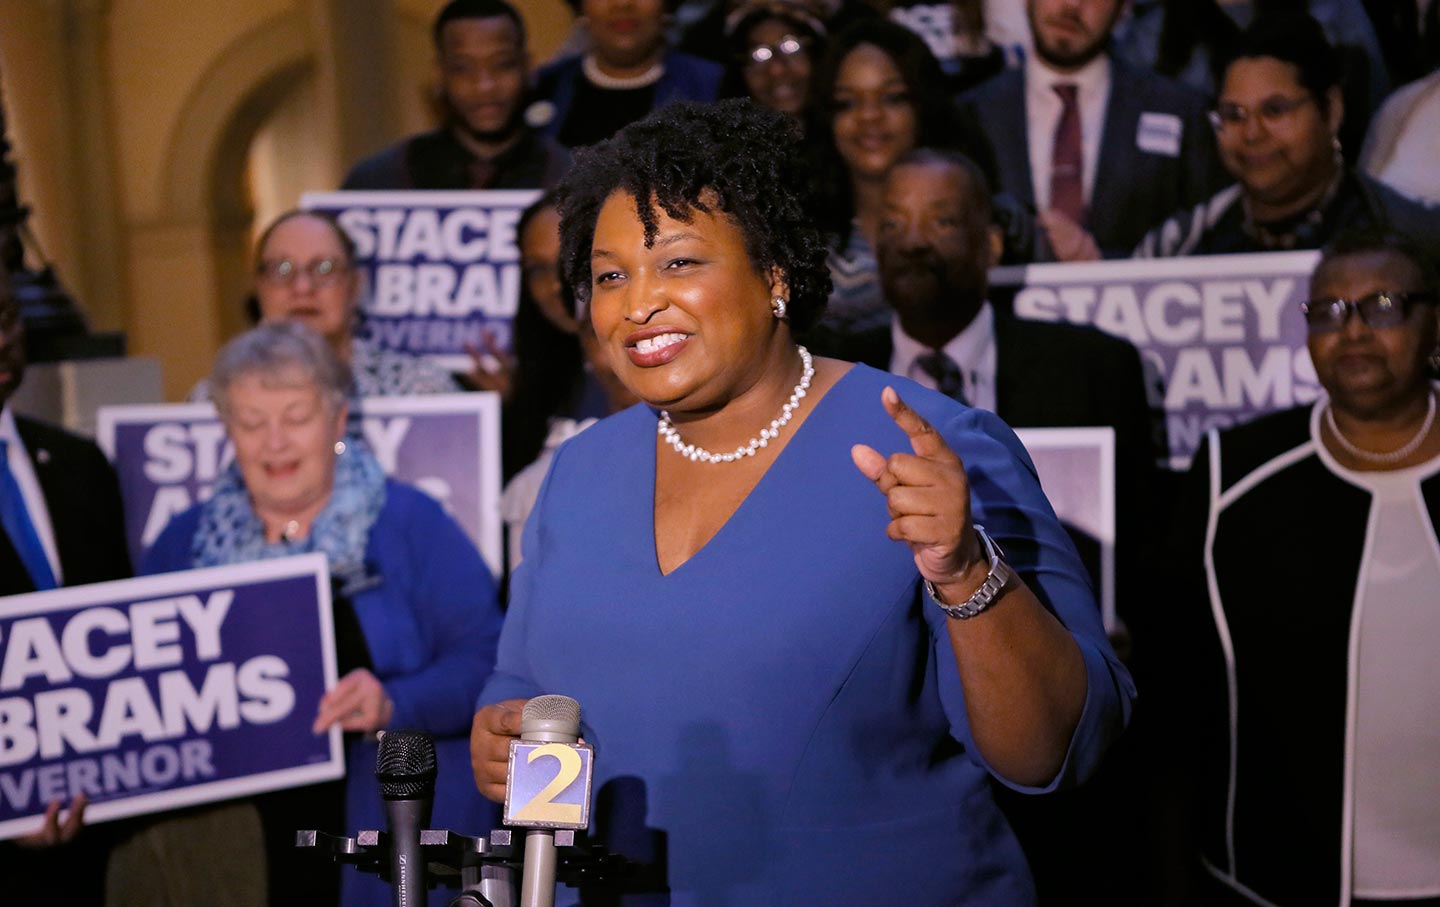 Stacey Abrams Georgia governor's race